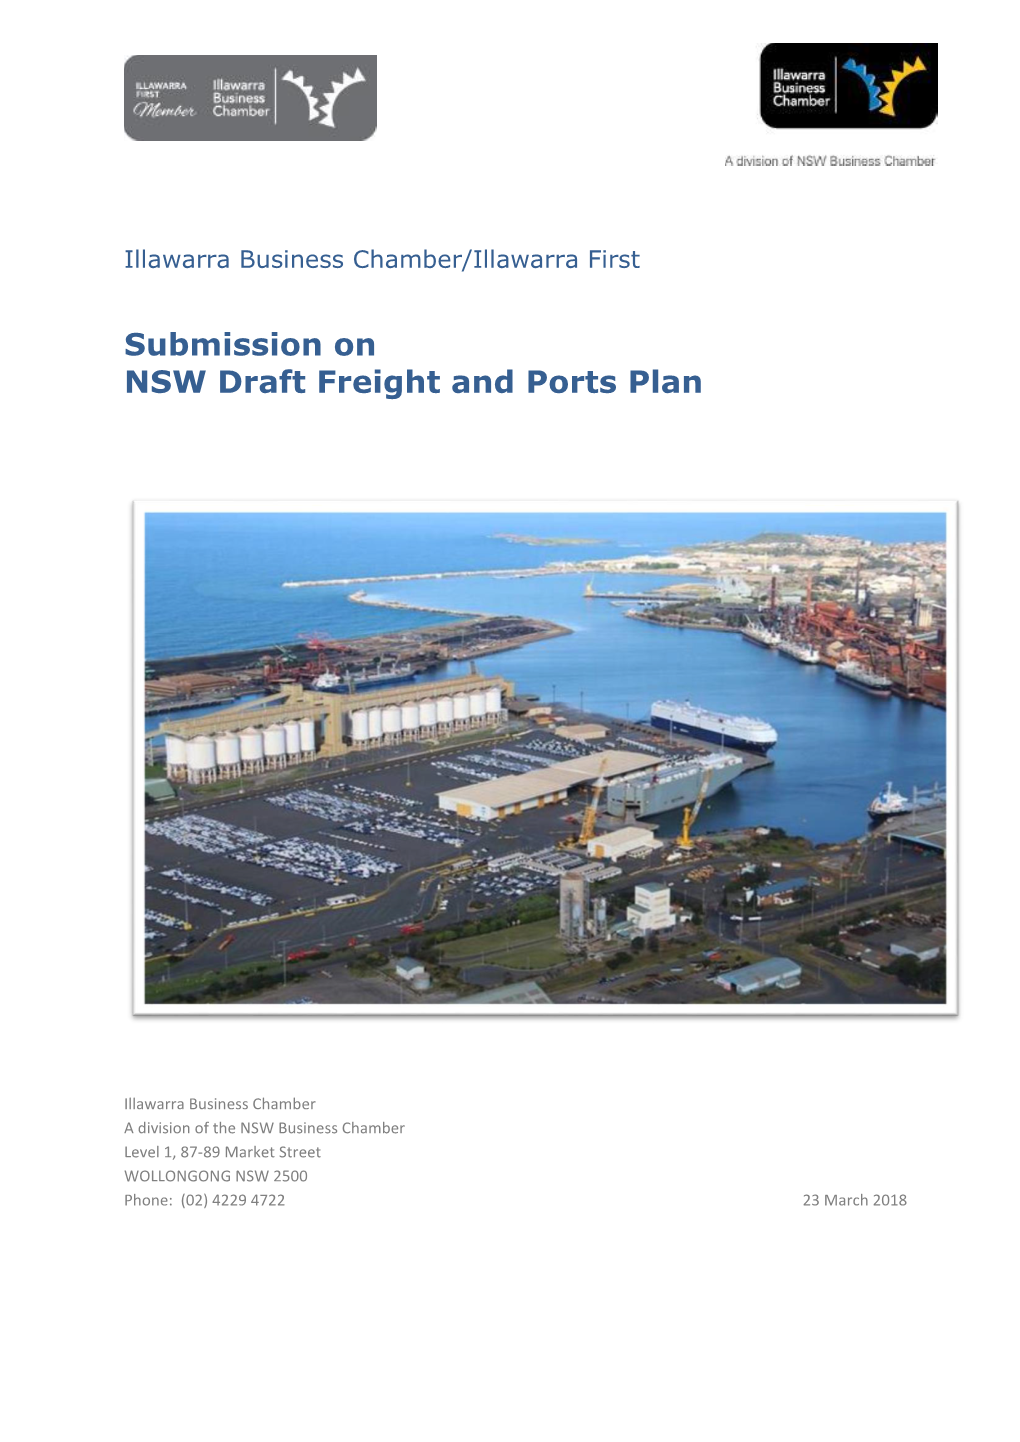 NSW Draft Freight and Ports Plan